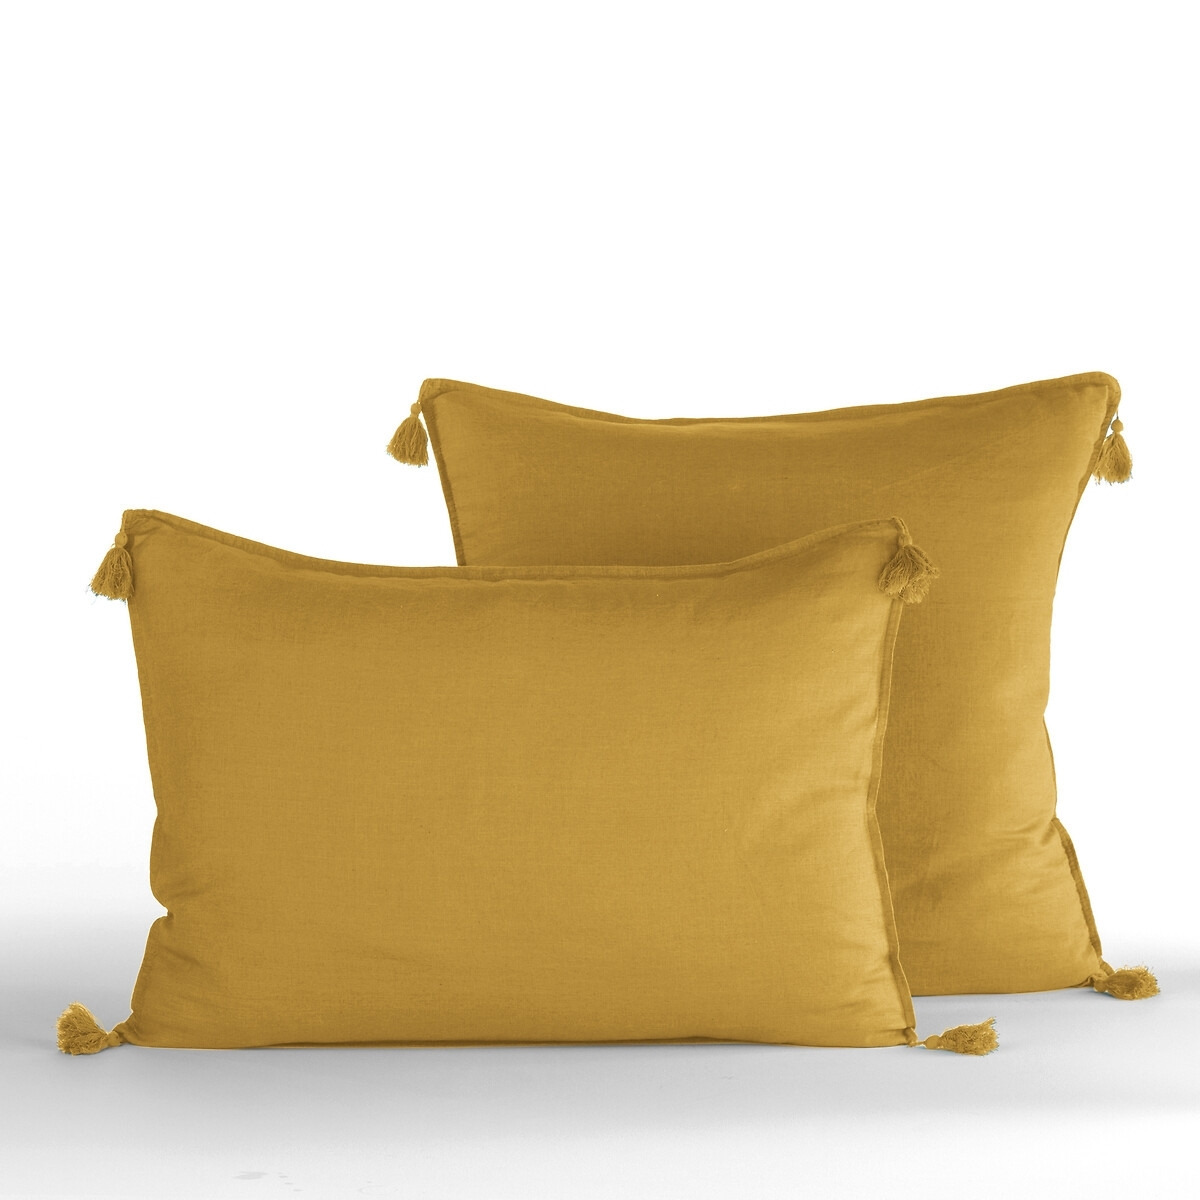 Carly Tassel 100% Washed Linen Pillowcase - image 1